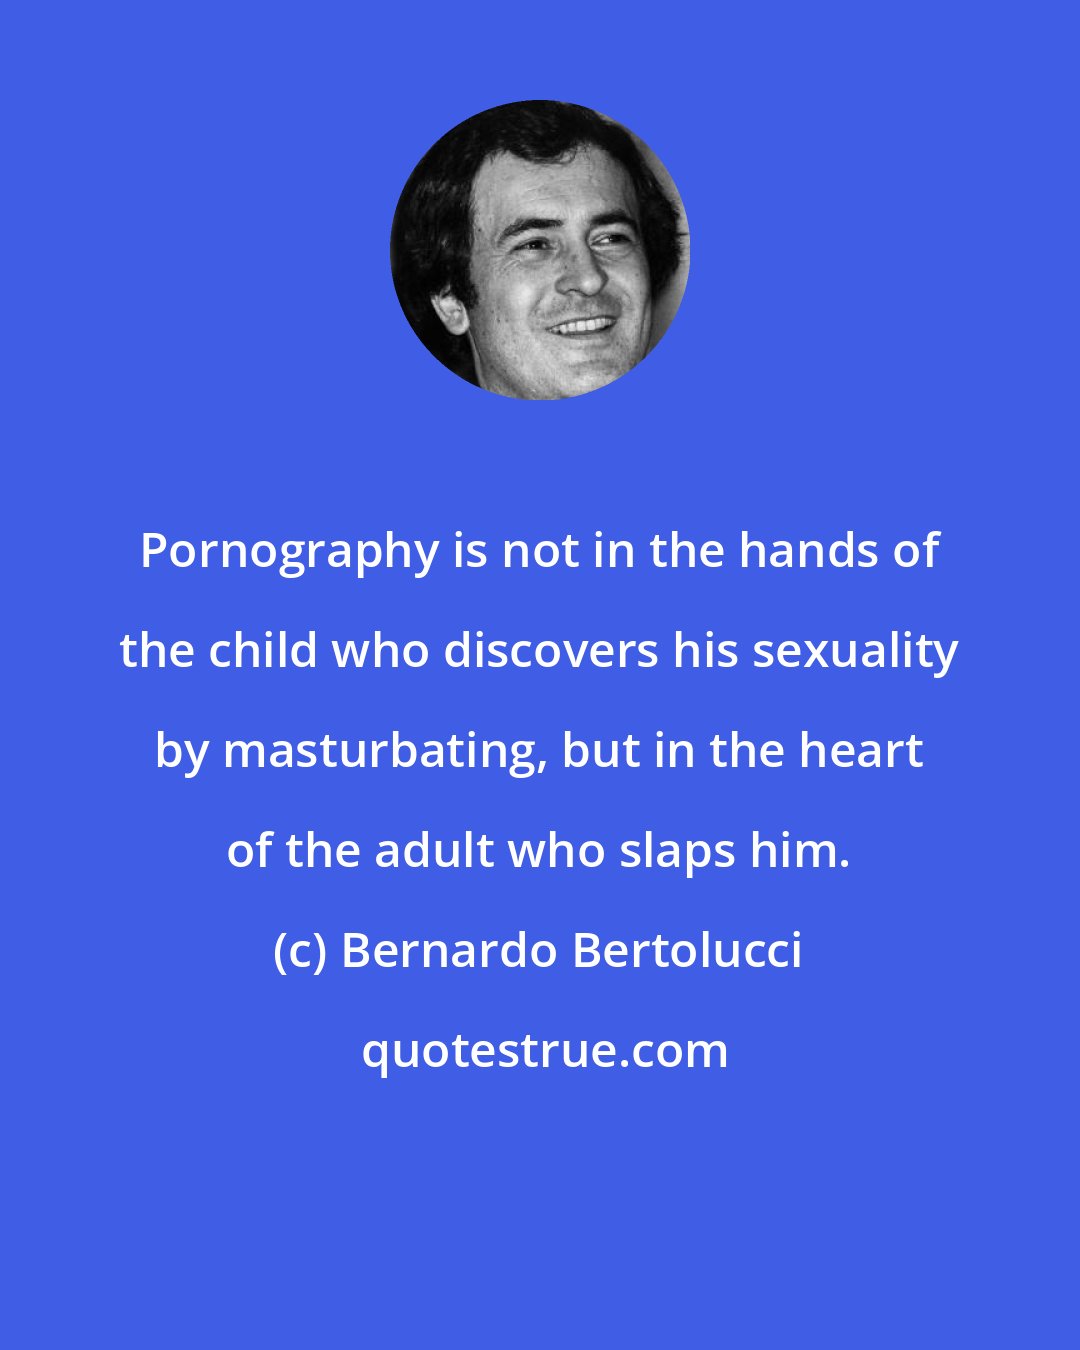 Bernardo Bertolucci: Pornography is not in the hands of the child who discovers his sexuality by masturbating, but in the heart of the adult who slaps him.